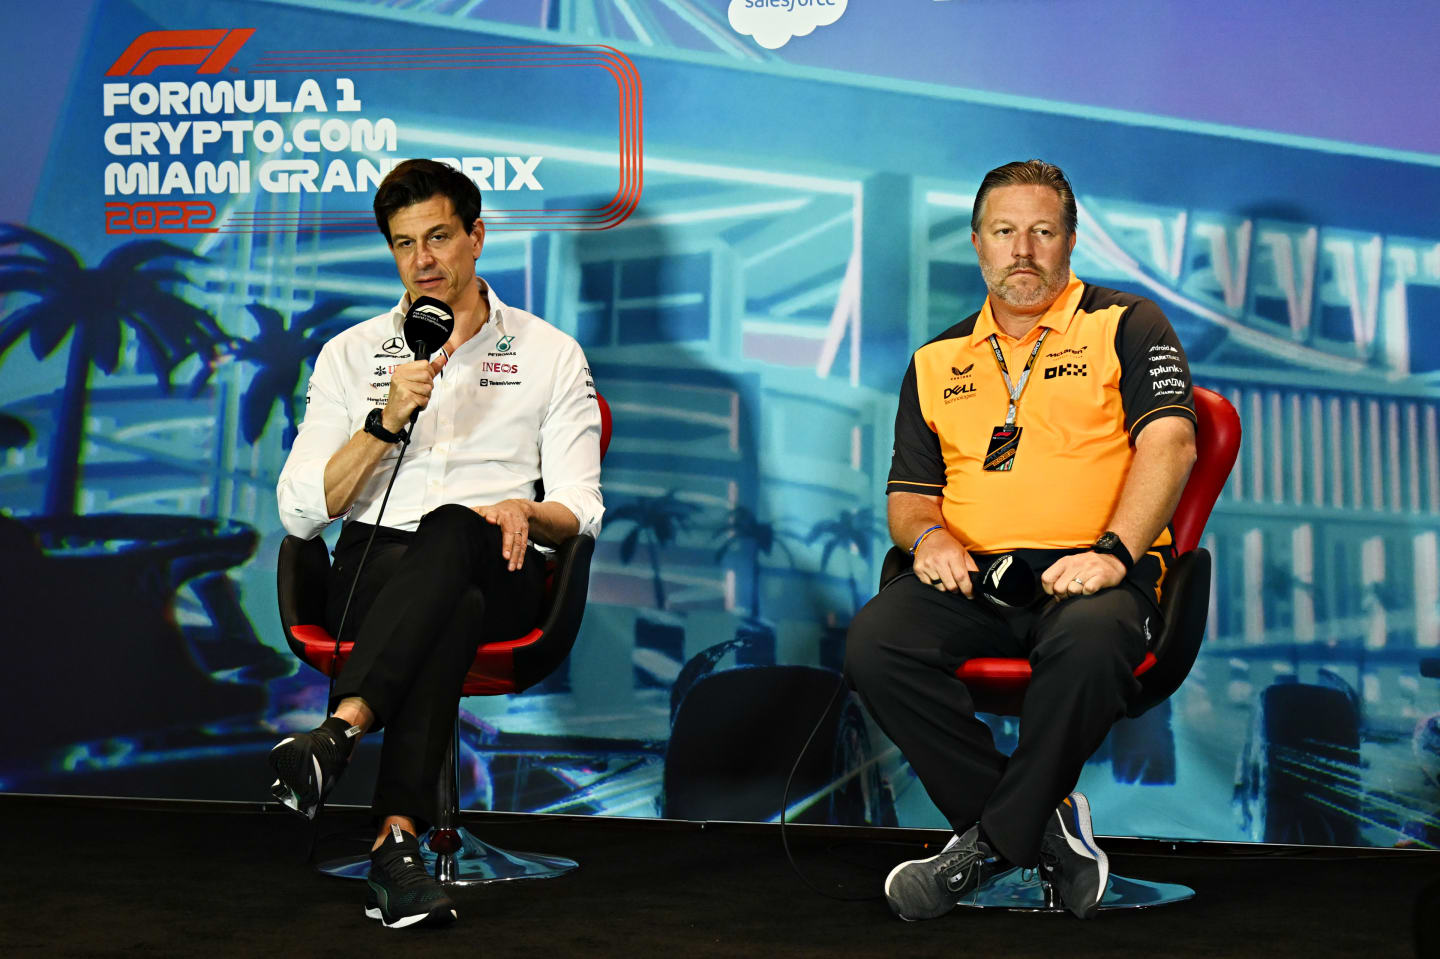 MIAMI, FLORIDA - MAY 07: Mercedes GP Executive Director Toto Wolff and McLaren Chief Executive Officer Zak Brown talk in the Team Principals Press Conference prior to final practice ahead of the F1 Grand Prix of Miami at the Miami International Autodrome on May 07, 2022 in Miami, Florida. (Photo by Clive Mason/Getty Images)